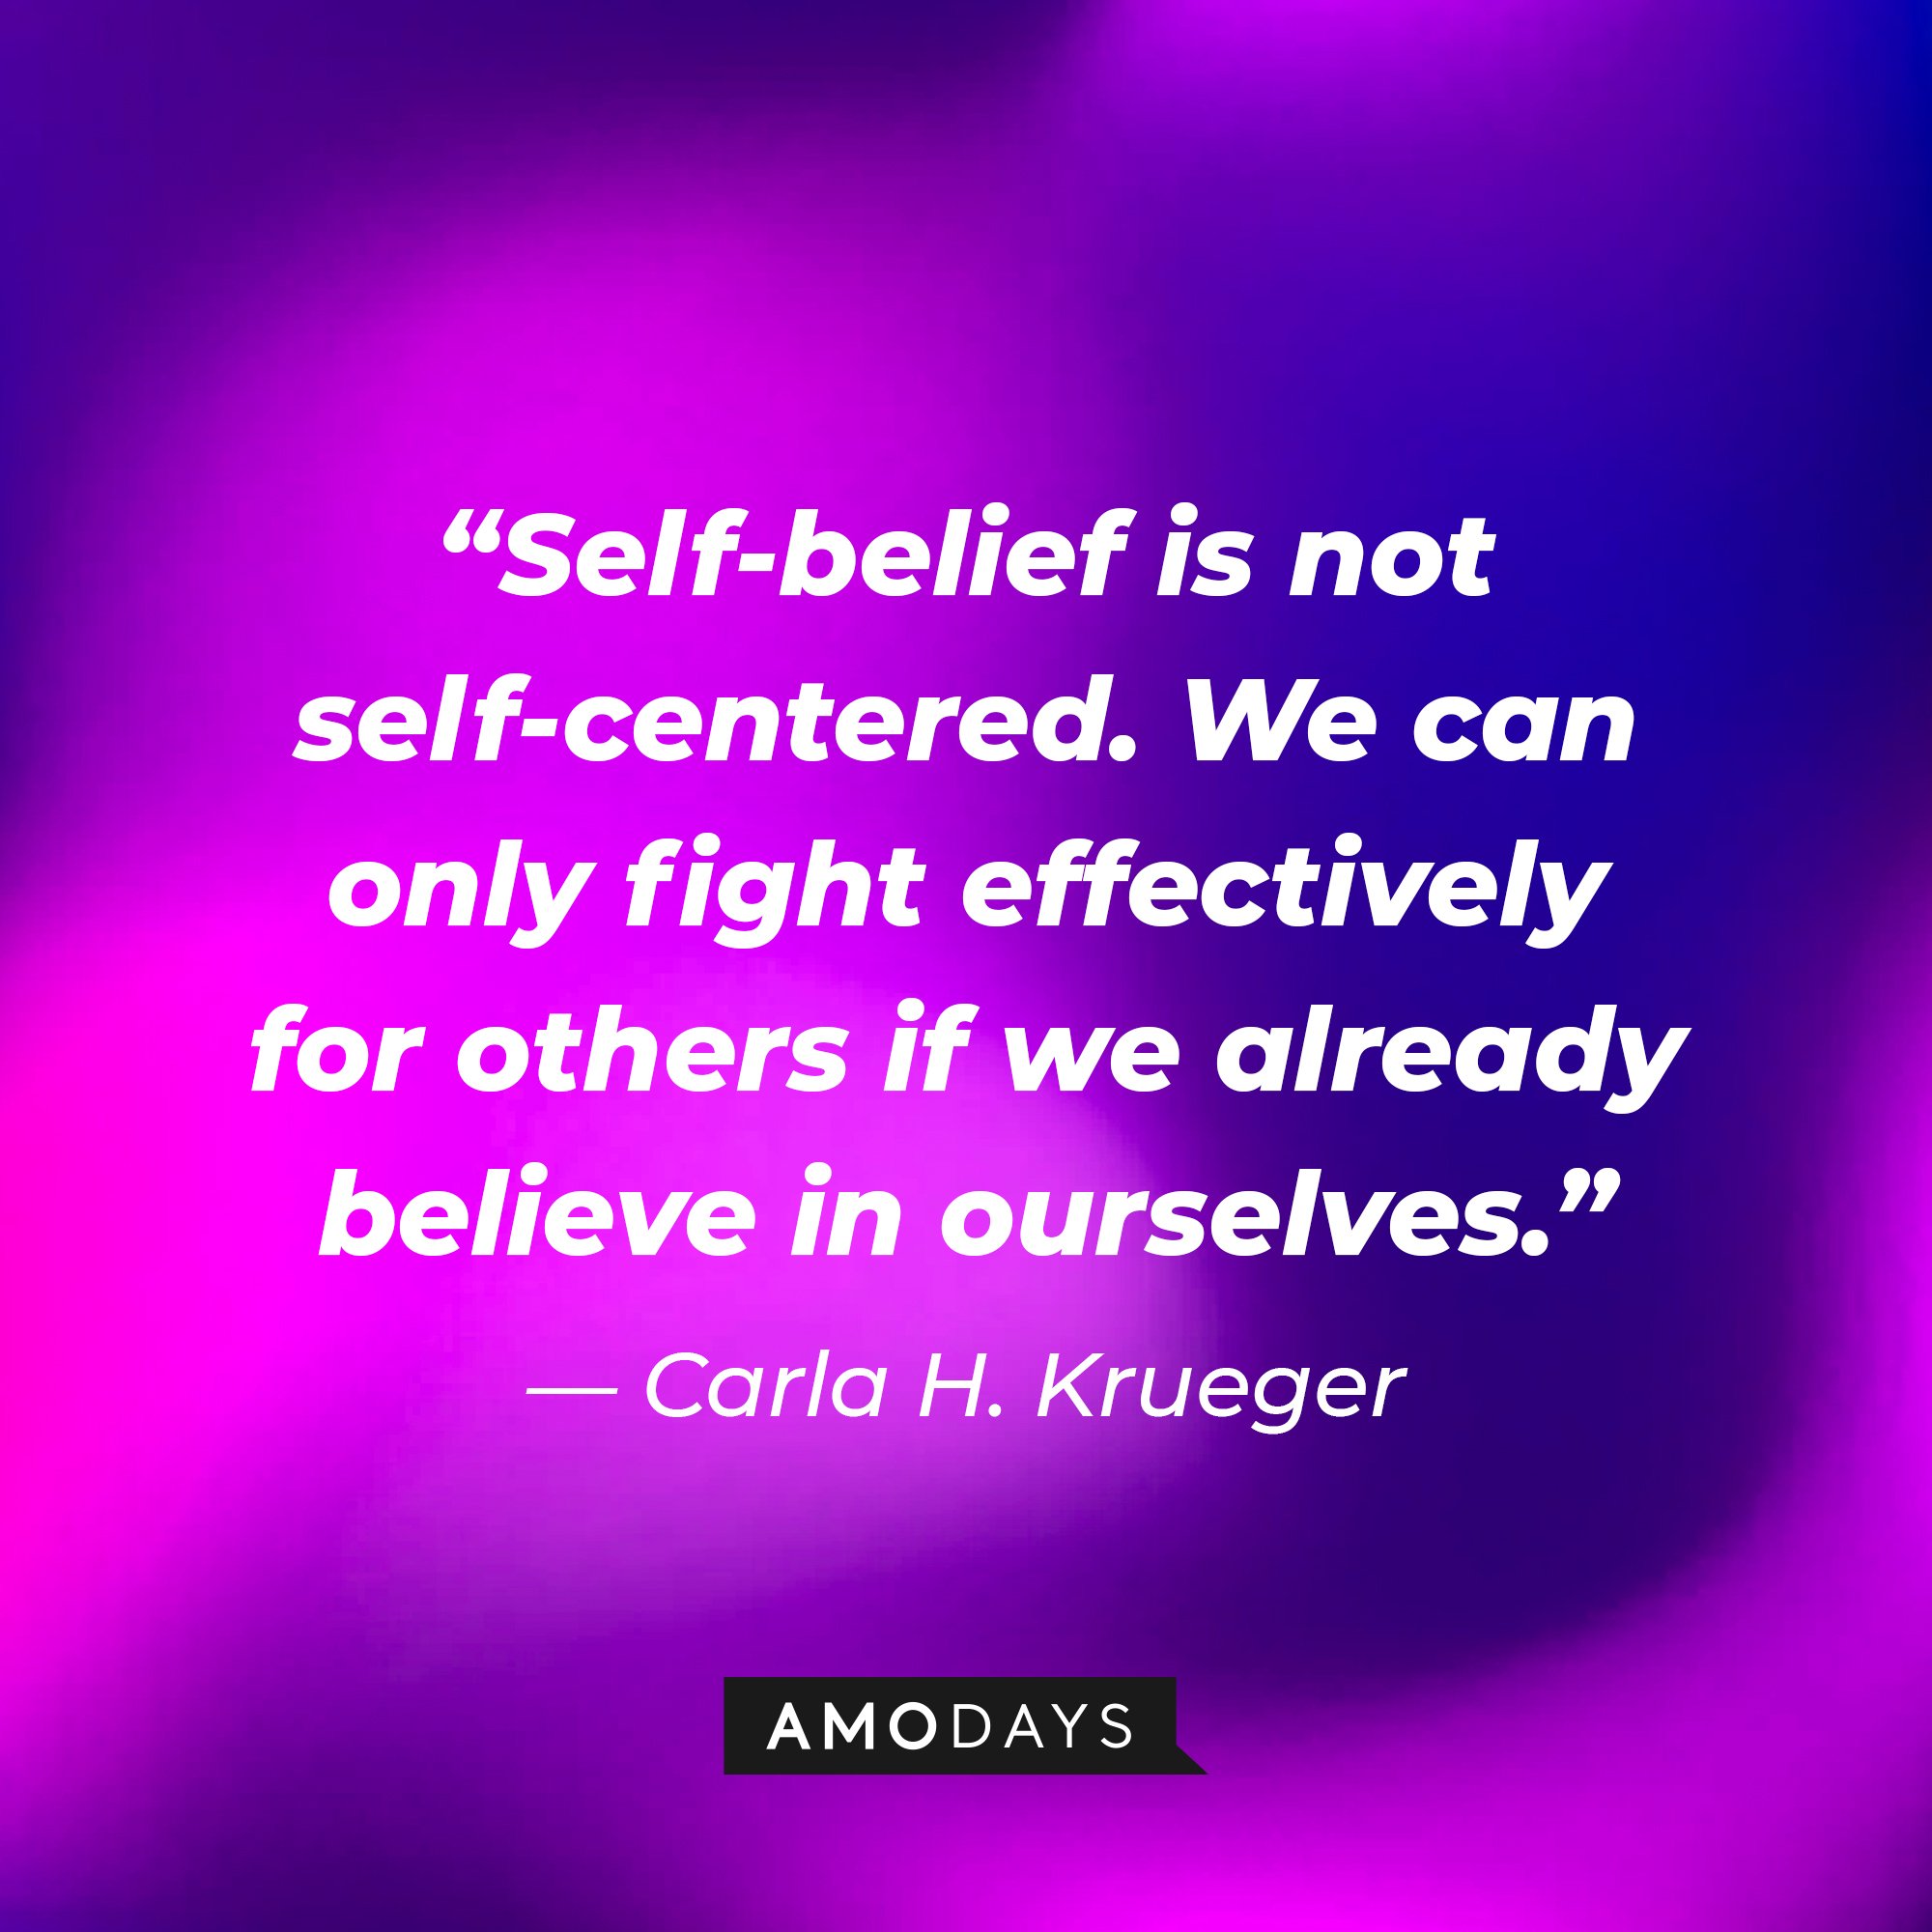 Carla H. Krueger’s quote: “Self-belief is not self-centered. We can only fight effectively for others if we already believe in ourselves.” | Image: AmoDays